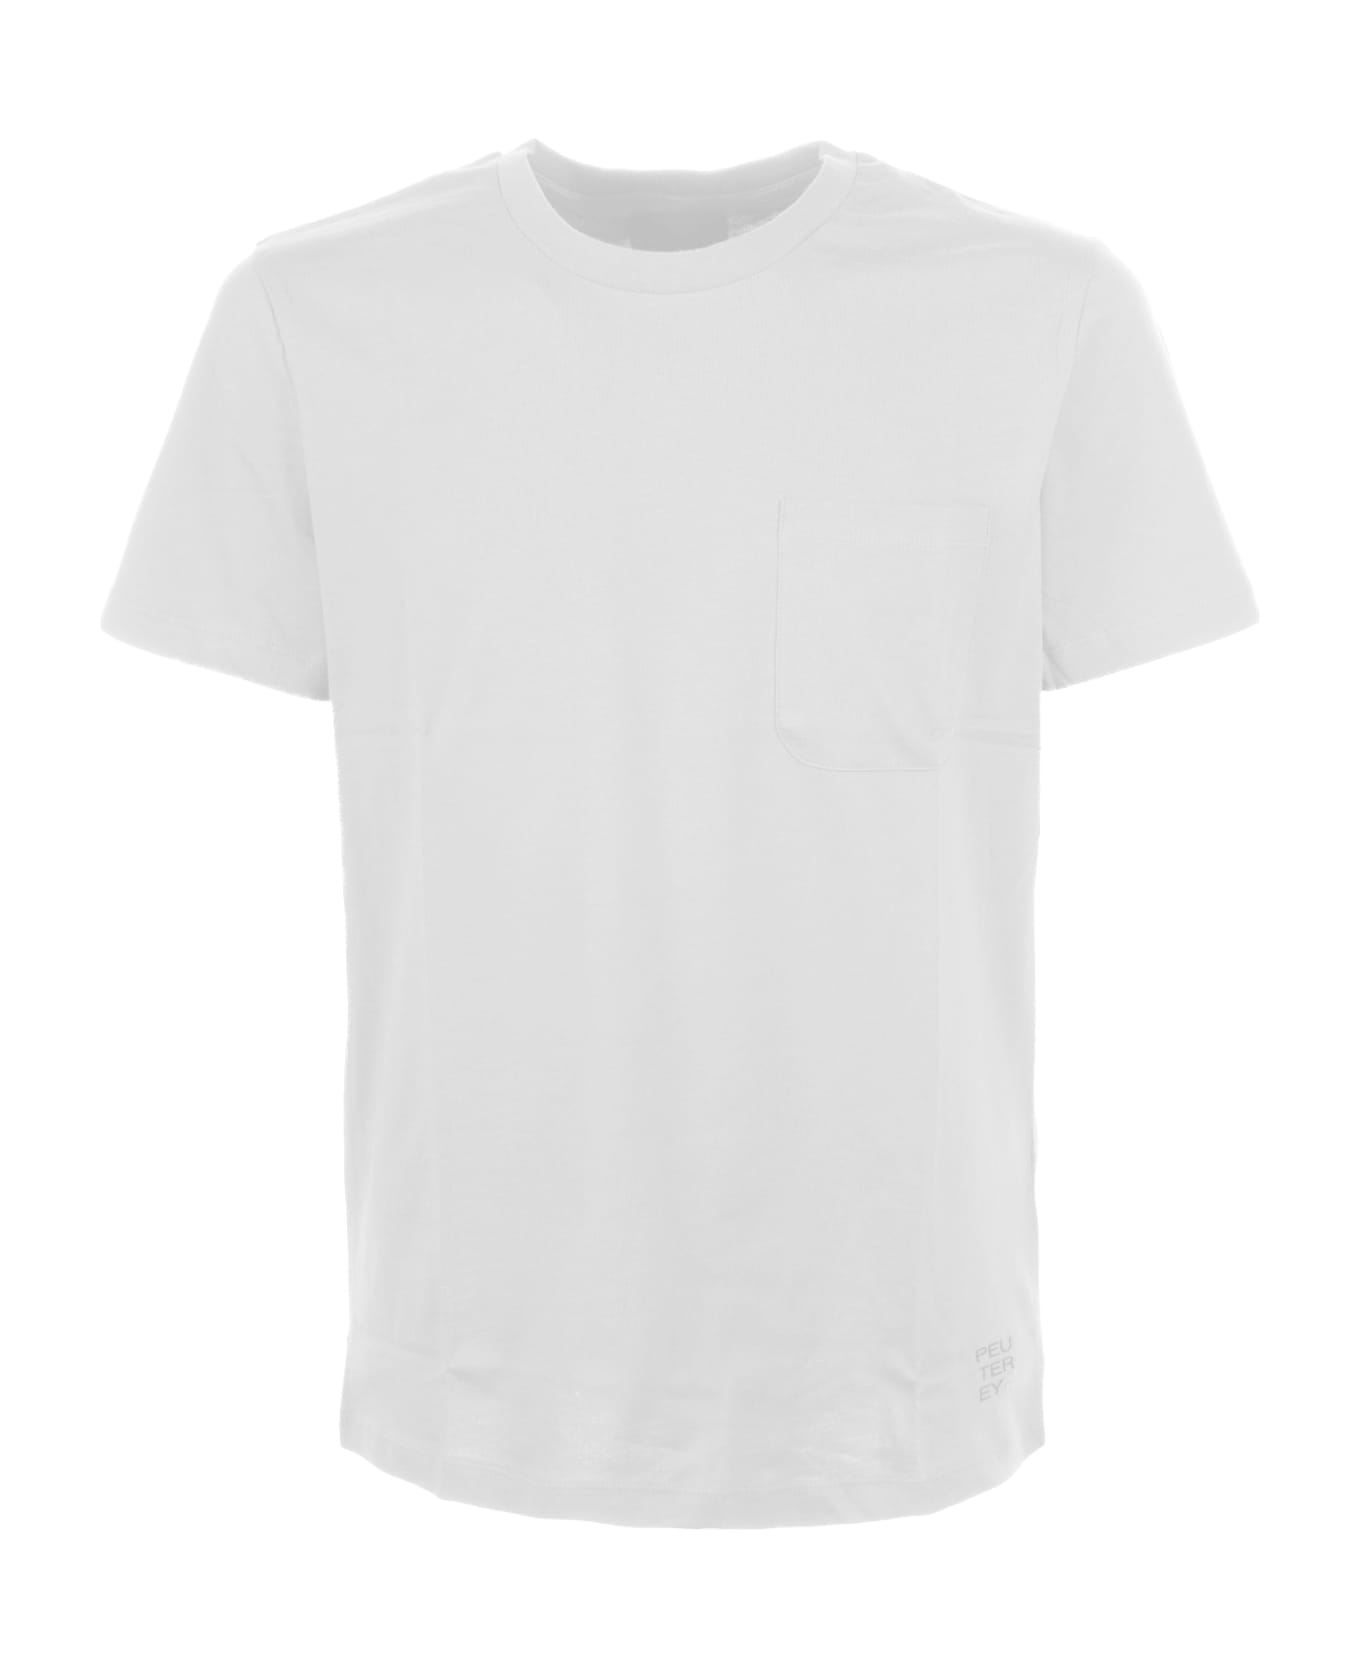 Peuterey White T-shirt With Pocket - BIANCO